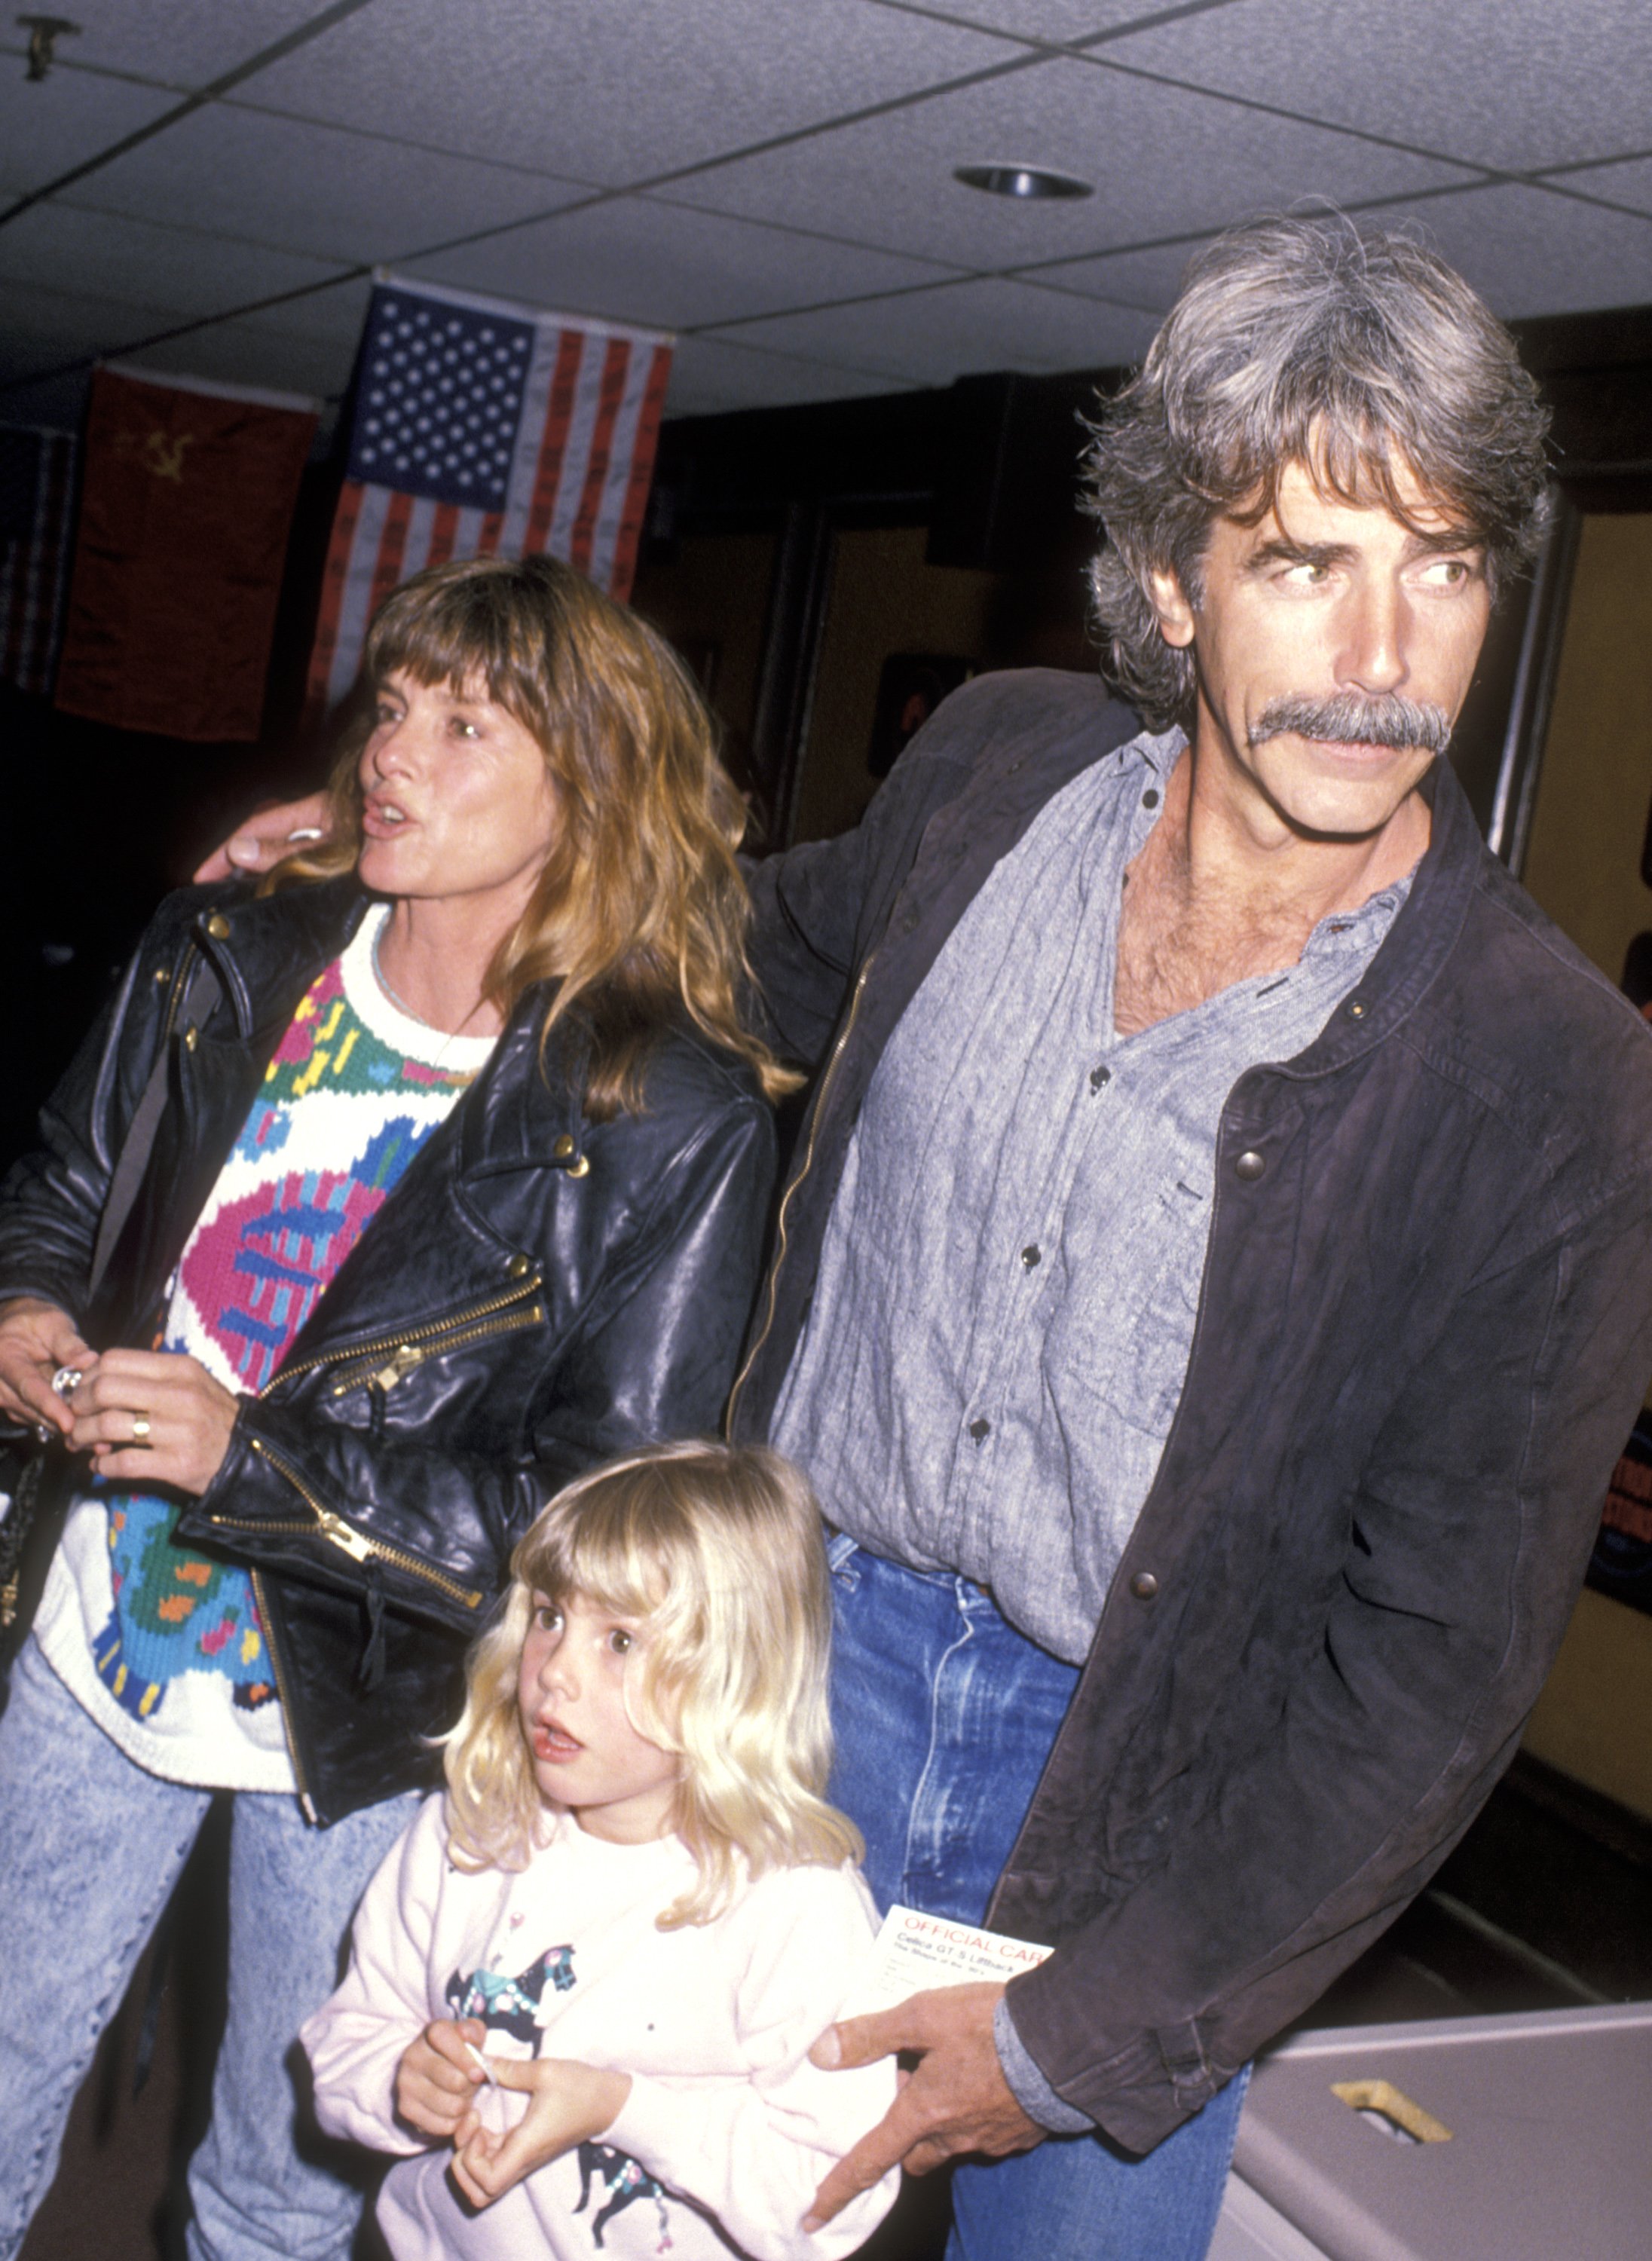 Actors Katharine Ross, Sam Elliott, and daughter Cleo Elliott at the "Moscow Circus Opening" on March 14, 1990 at Great Western Forum in Inglewood, California. | Source: Ron Galella/Getty Images